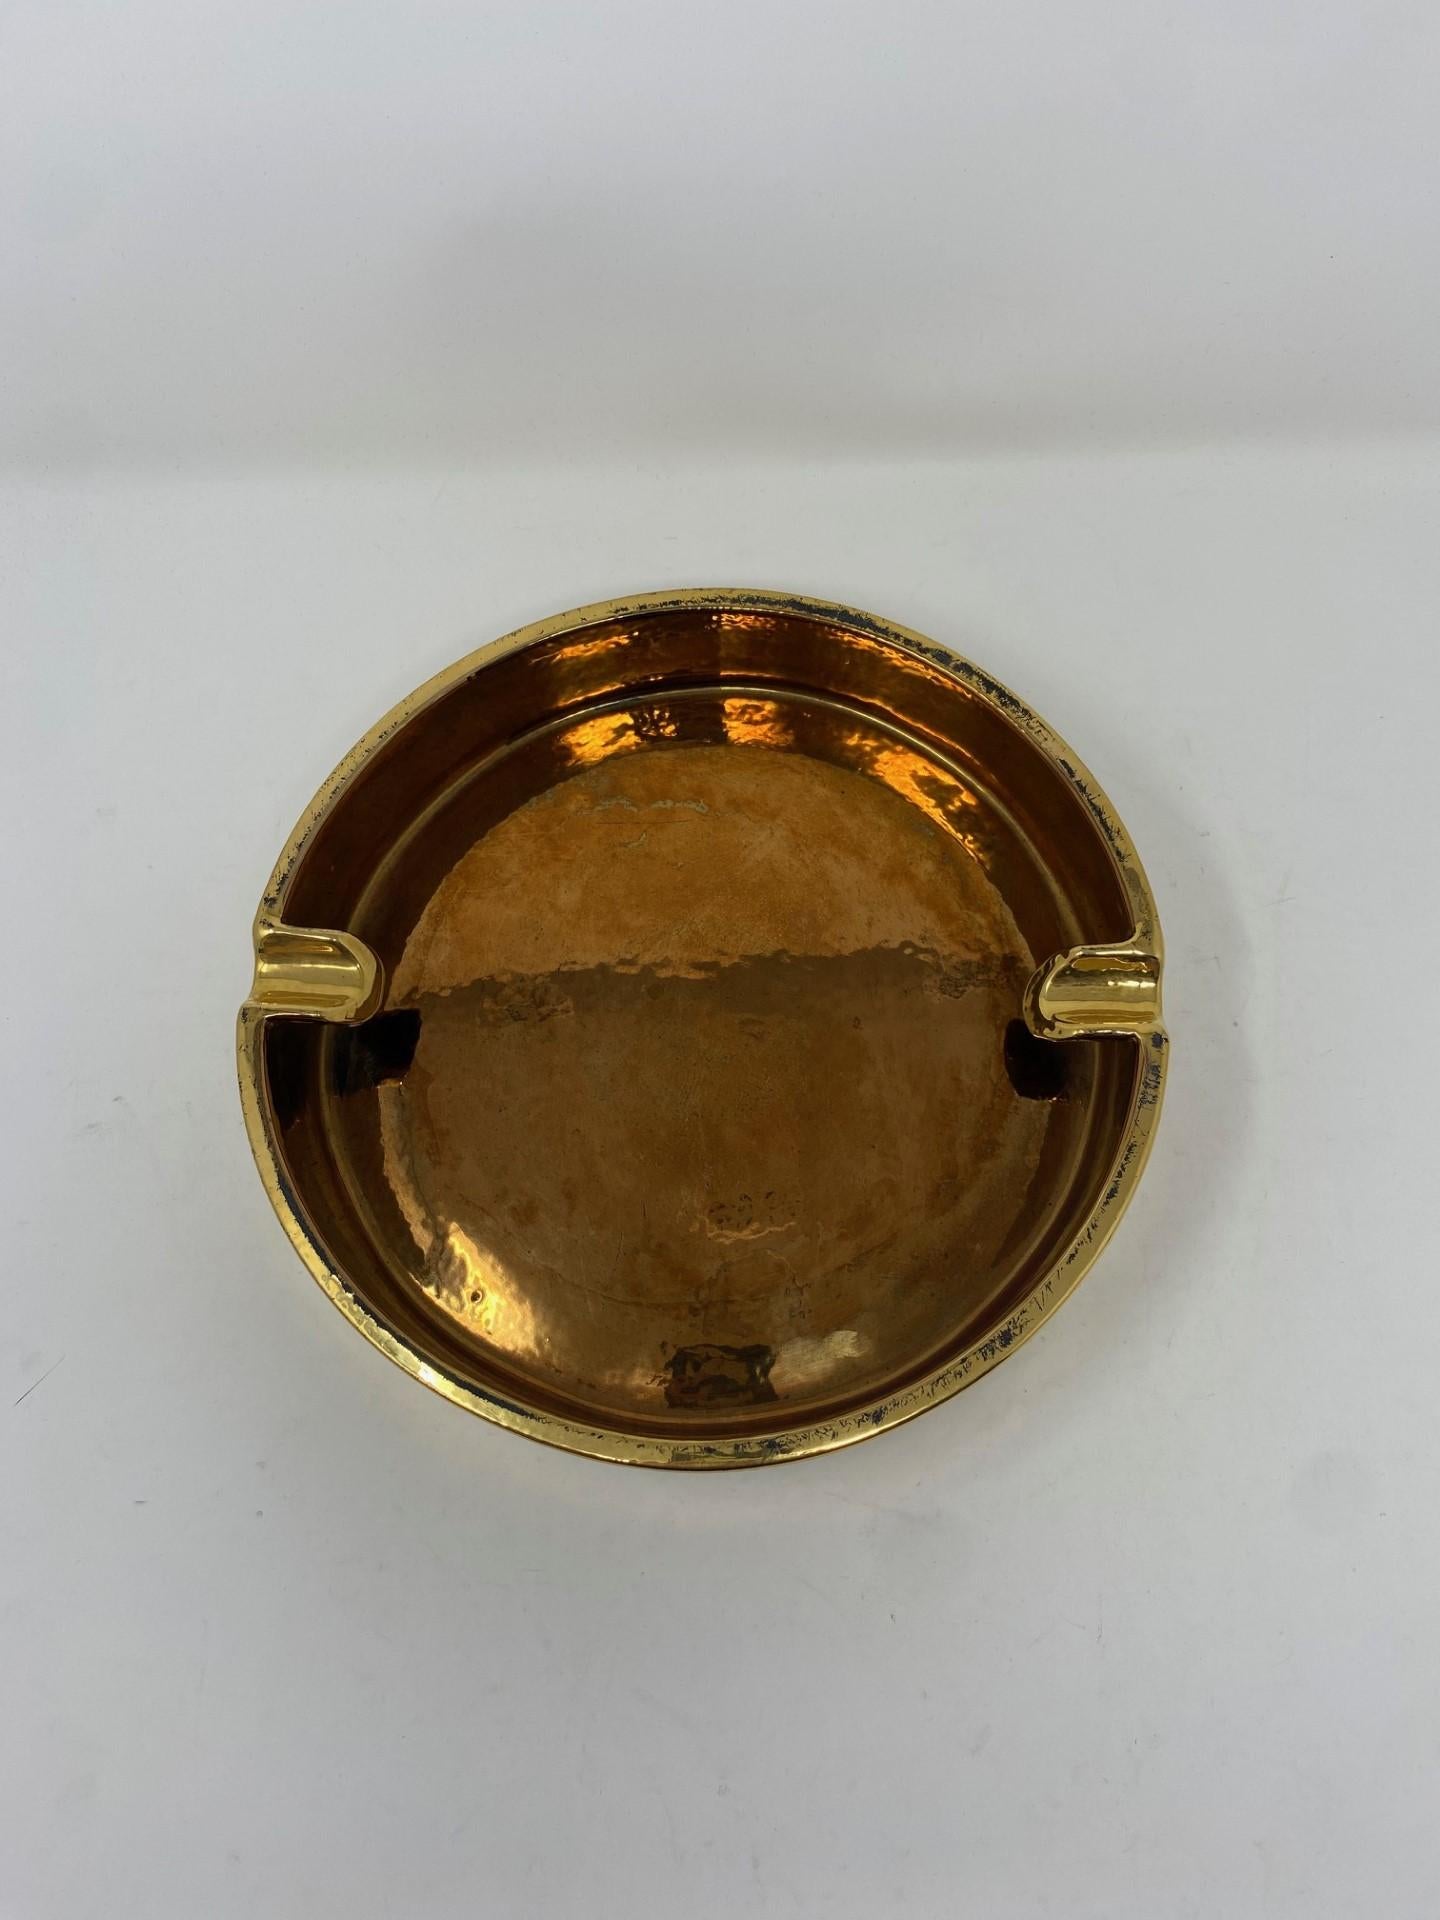 Bitossi ceramic ashtray gold Berkeley House signed Italy, 1960s. A beautiful and sculptural clean design ashtray. On the underside you will find an original paper label. Made by Bitossi for Berkeley House - a San Franscisco retailer.
Mid-Century,